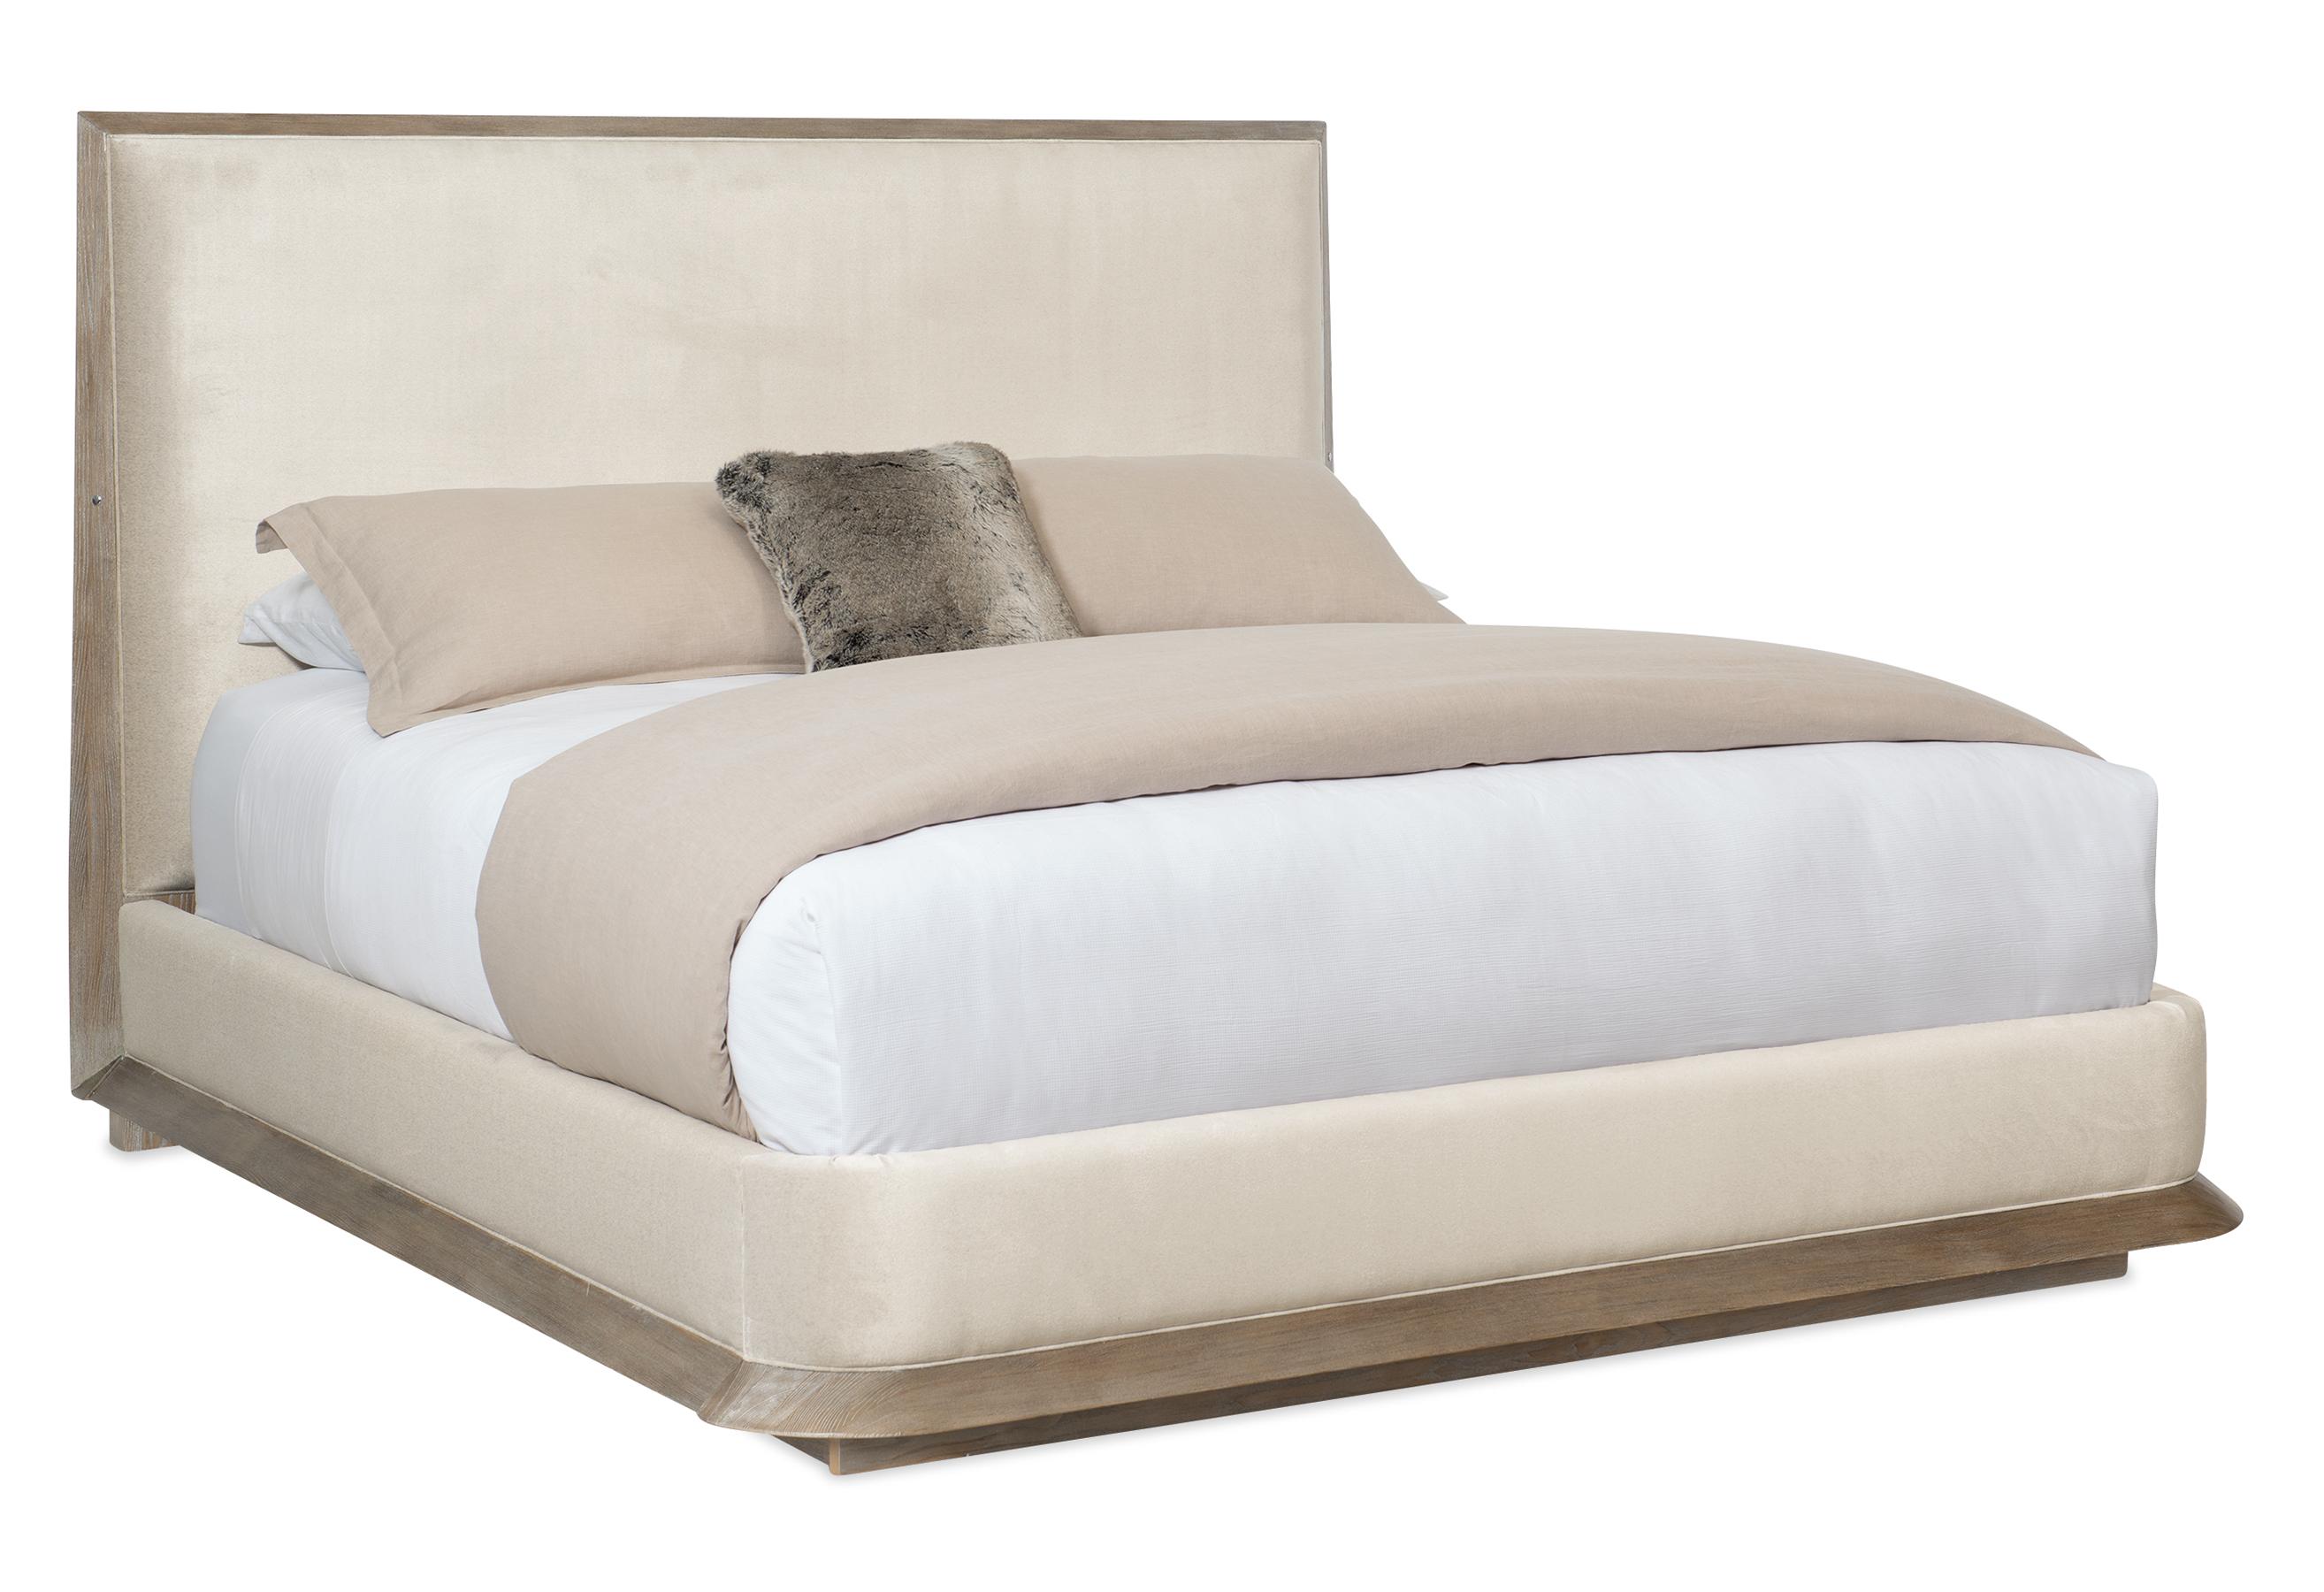 Contemporary Platform Bed THE STAGE IS SET CLA-019-1011 in Neutral Fabric